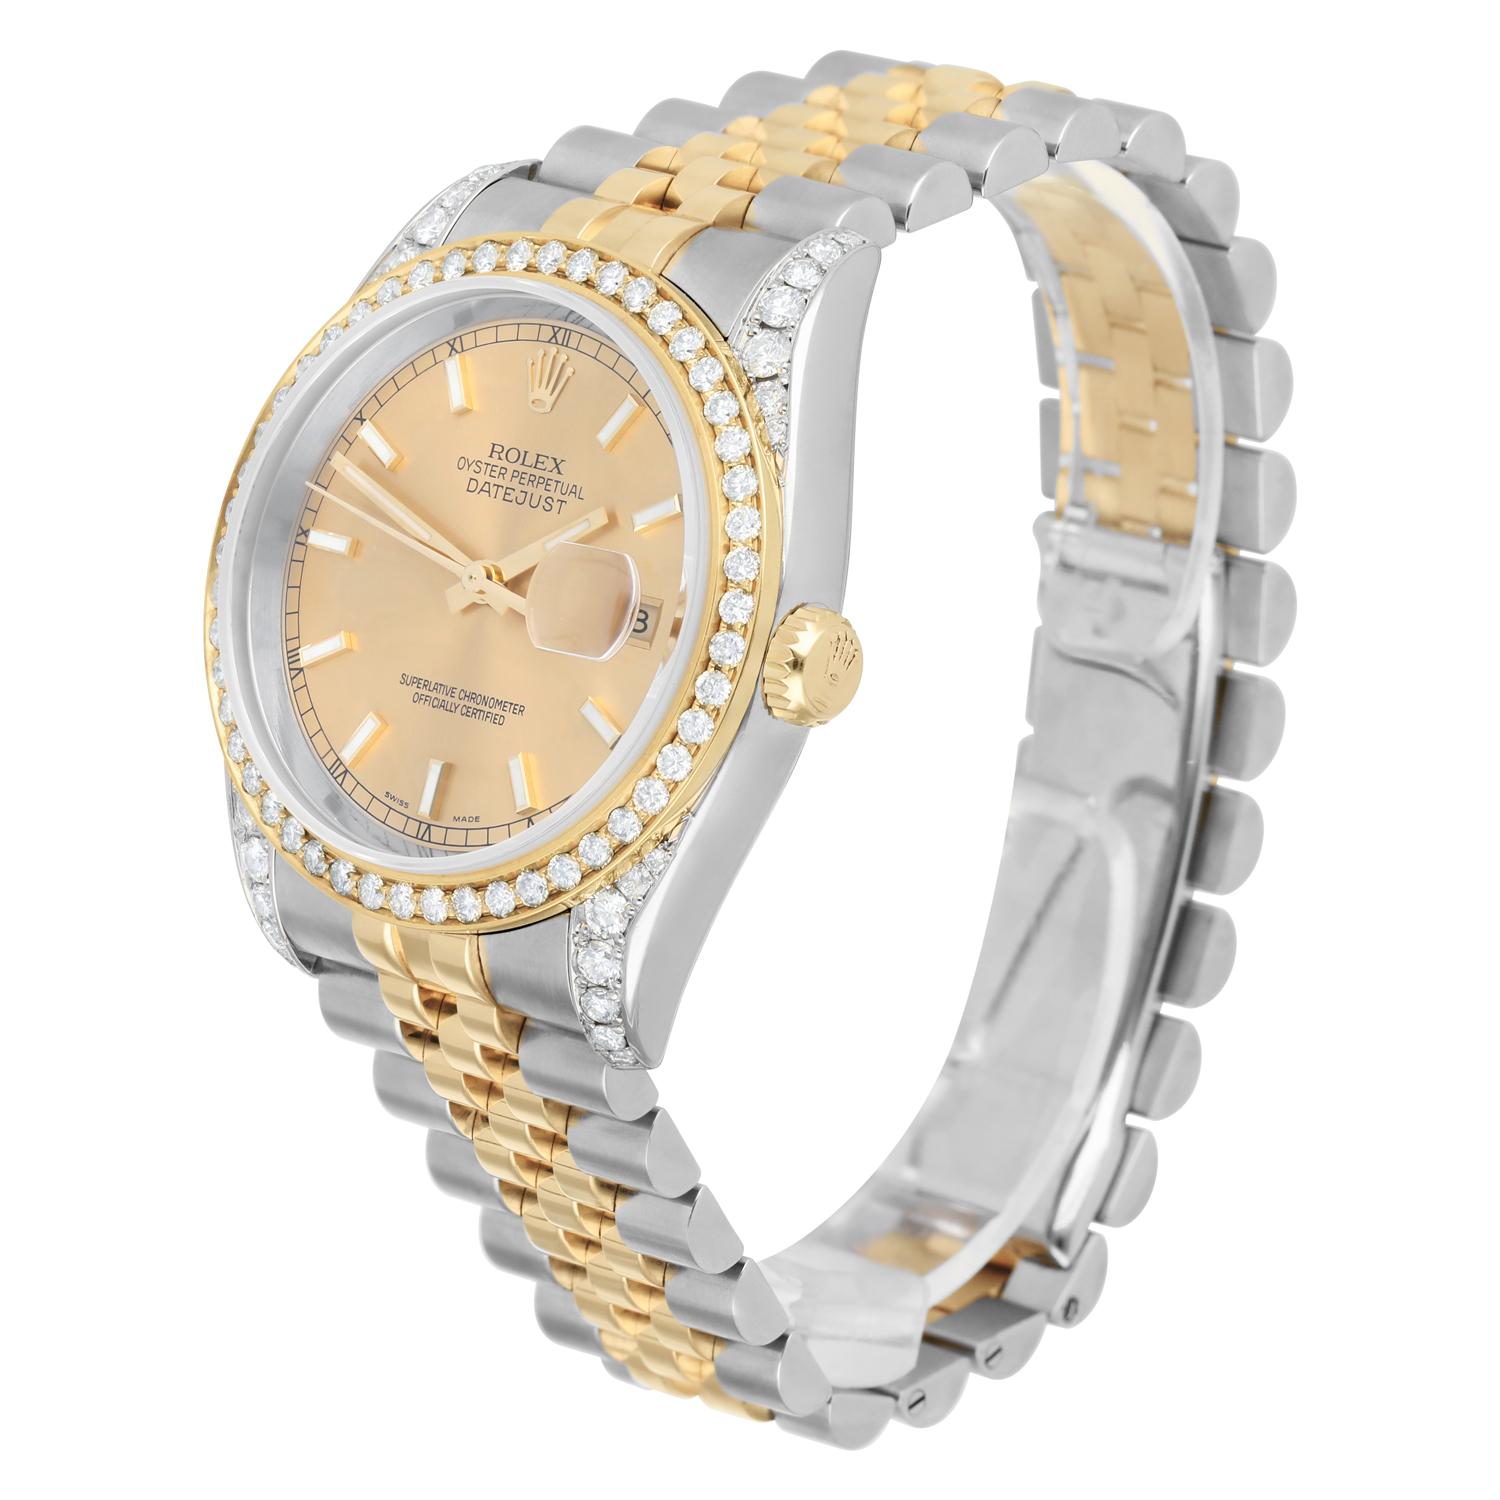 Rolex Datejust 36 Gold & Steel 116233 Champagne Index Dial Diamond Watch For Sale 1